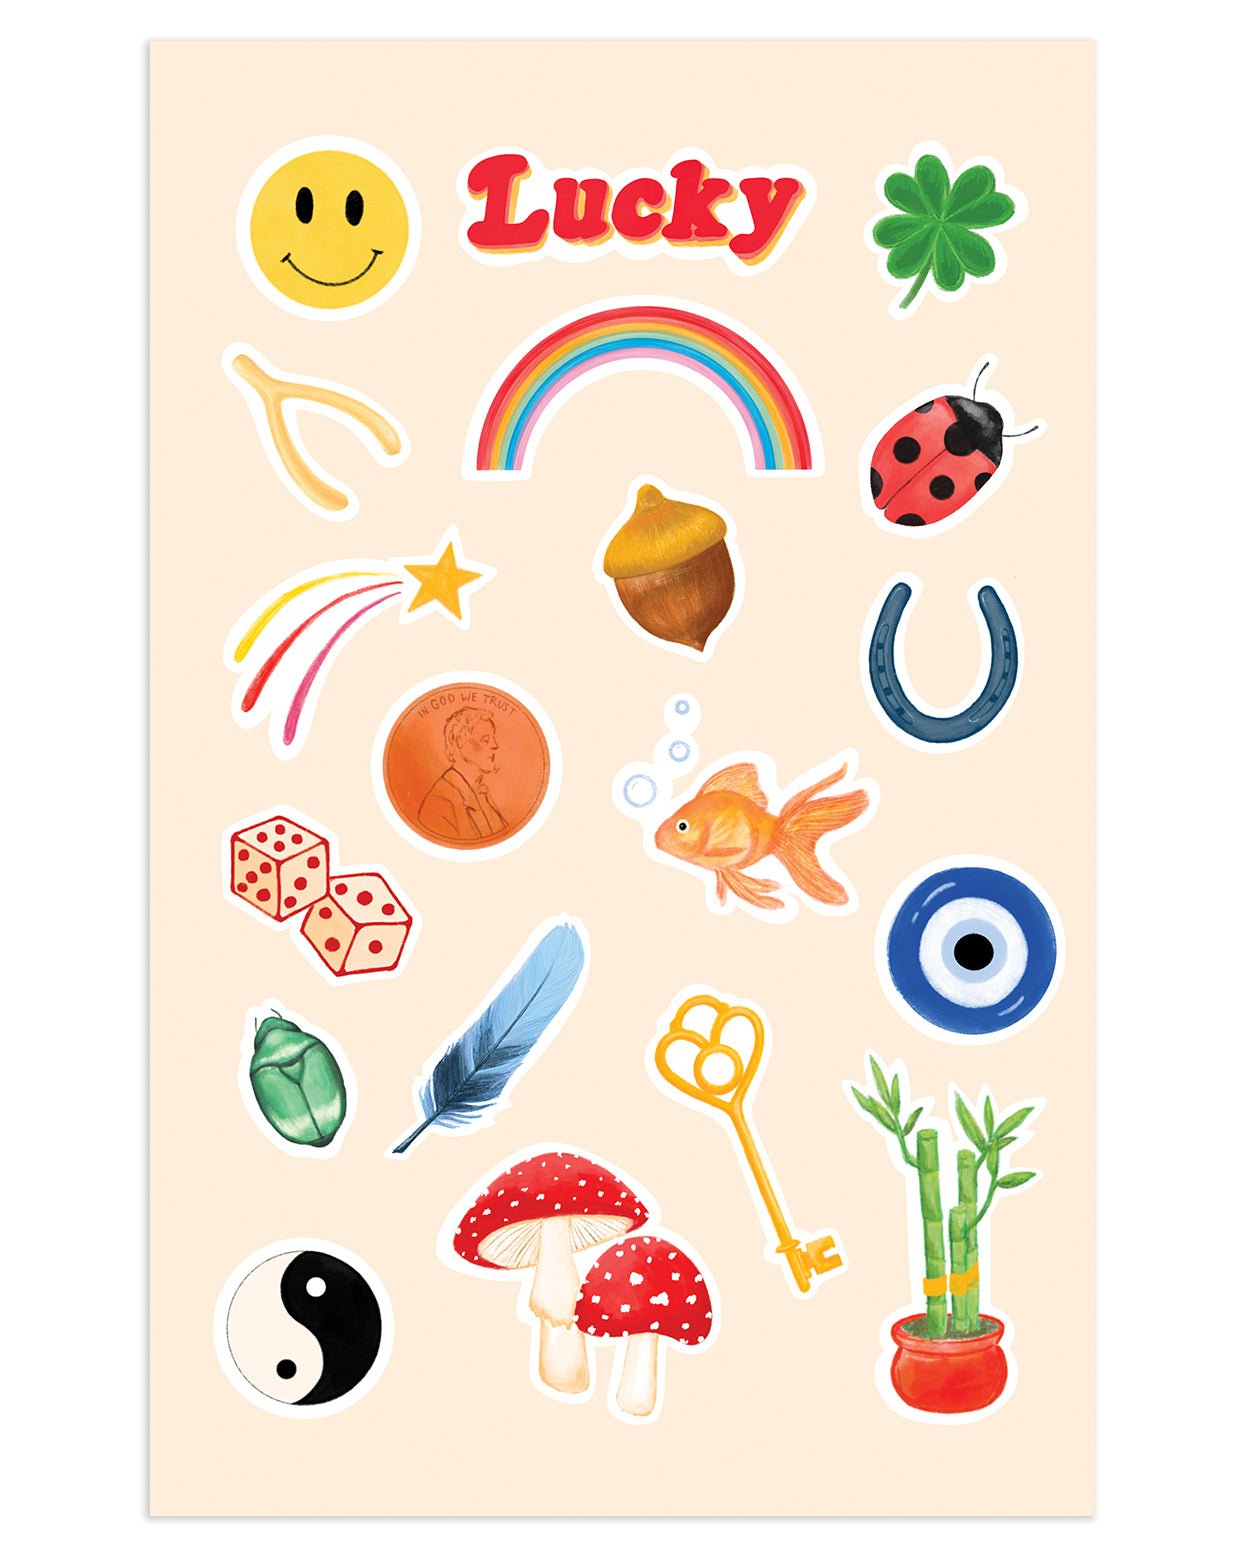 Lucky Charms sticker sheet with varying lucky items on a cream colored sheet against a white background.